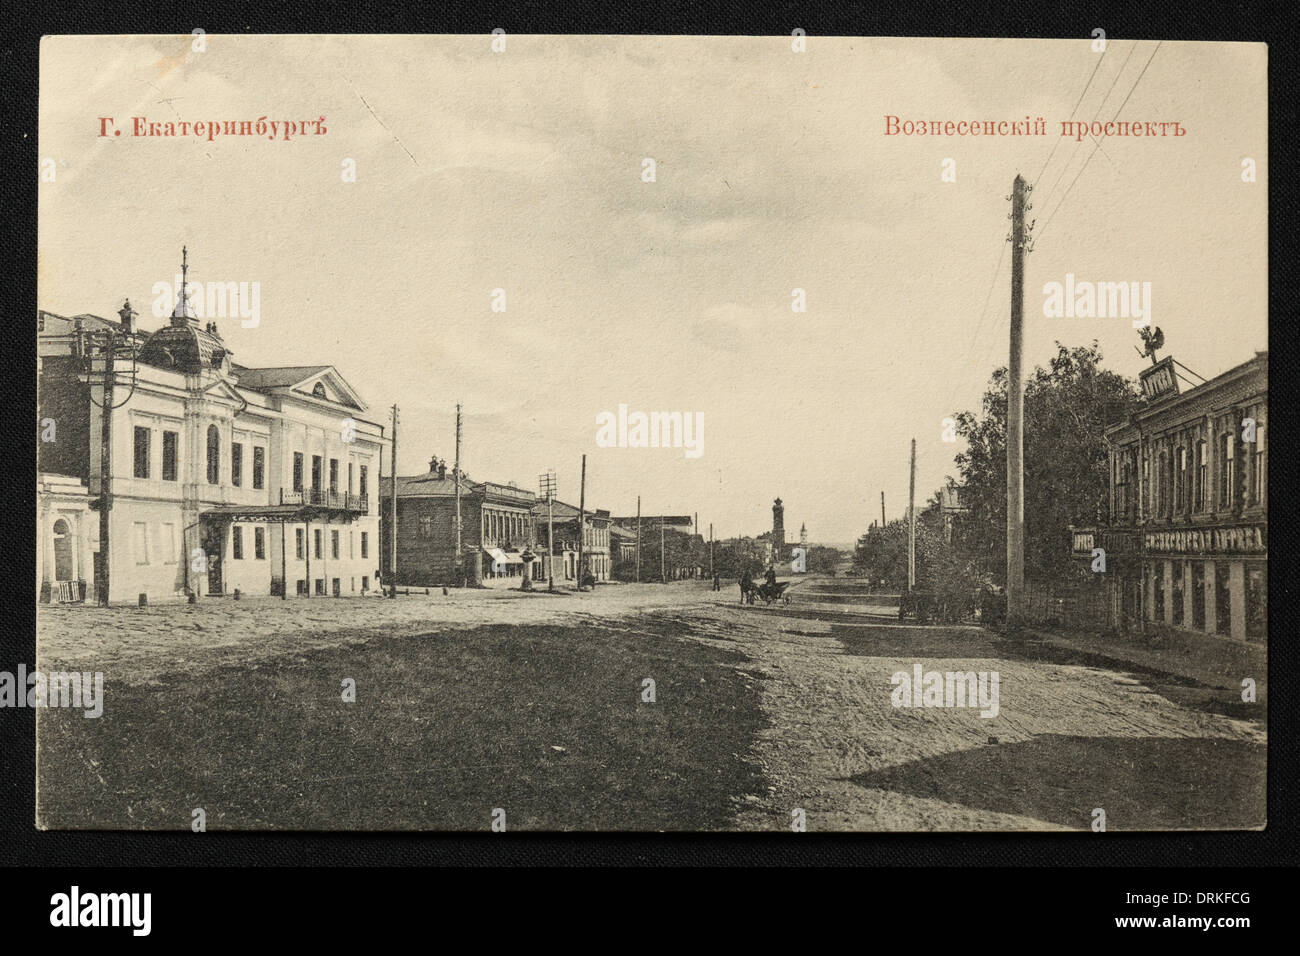 Voznesensky Prospekt Avenue in Yekaterinburg, Russian Empire. Black and white vintage photograph by Russian photographer Veniamin Metenkov dated from the beginning of the 20th century issued in the Russian vintage postcard published by Veniamin Metenkov himself in Yekaterinburg. Text in Russian: Yekaterinburg. Voznesensky Prospekt Avenue. The Assembly of the Nobility, now the Ural Theatrical Academy (1st L) and the own house of photographer Veniamin Metenkov (2nd L) are seen in the picture. Courtesy of the Azoor Postcard Collection. Stock Photo